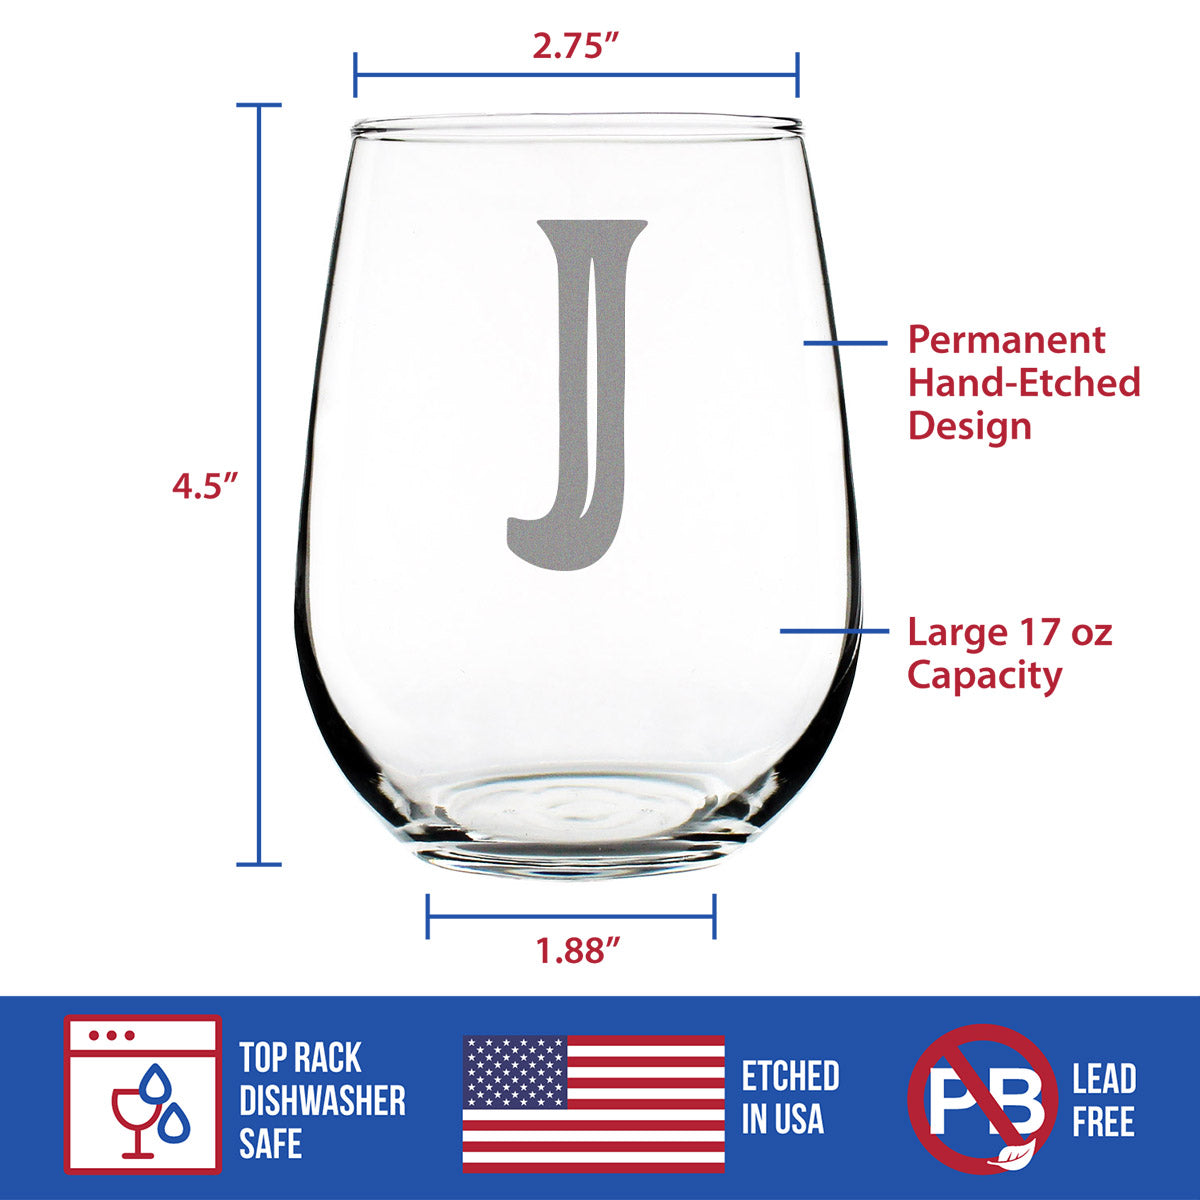 Monogram Bold Letter J - Stemless Wine Glass - Personalized Gifts for Women and Men - Large Engraved Glasses